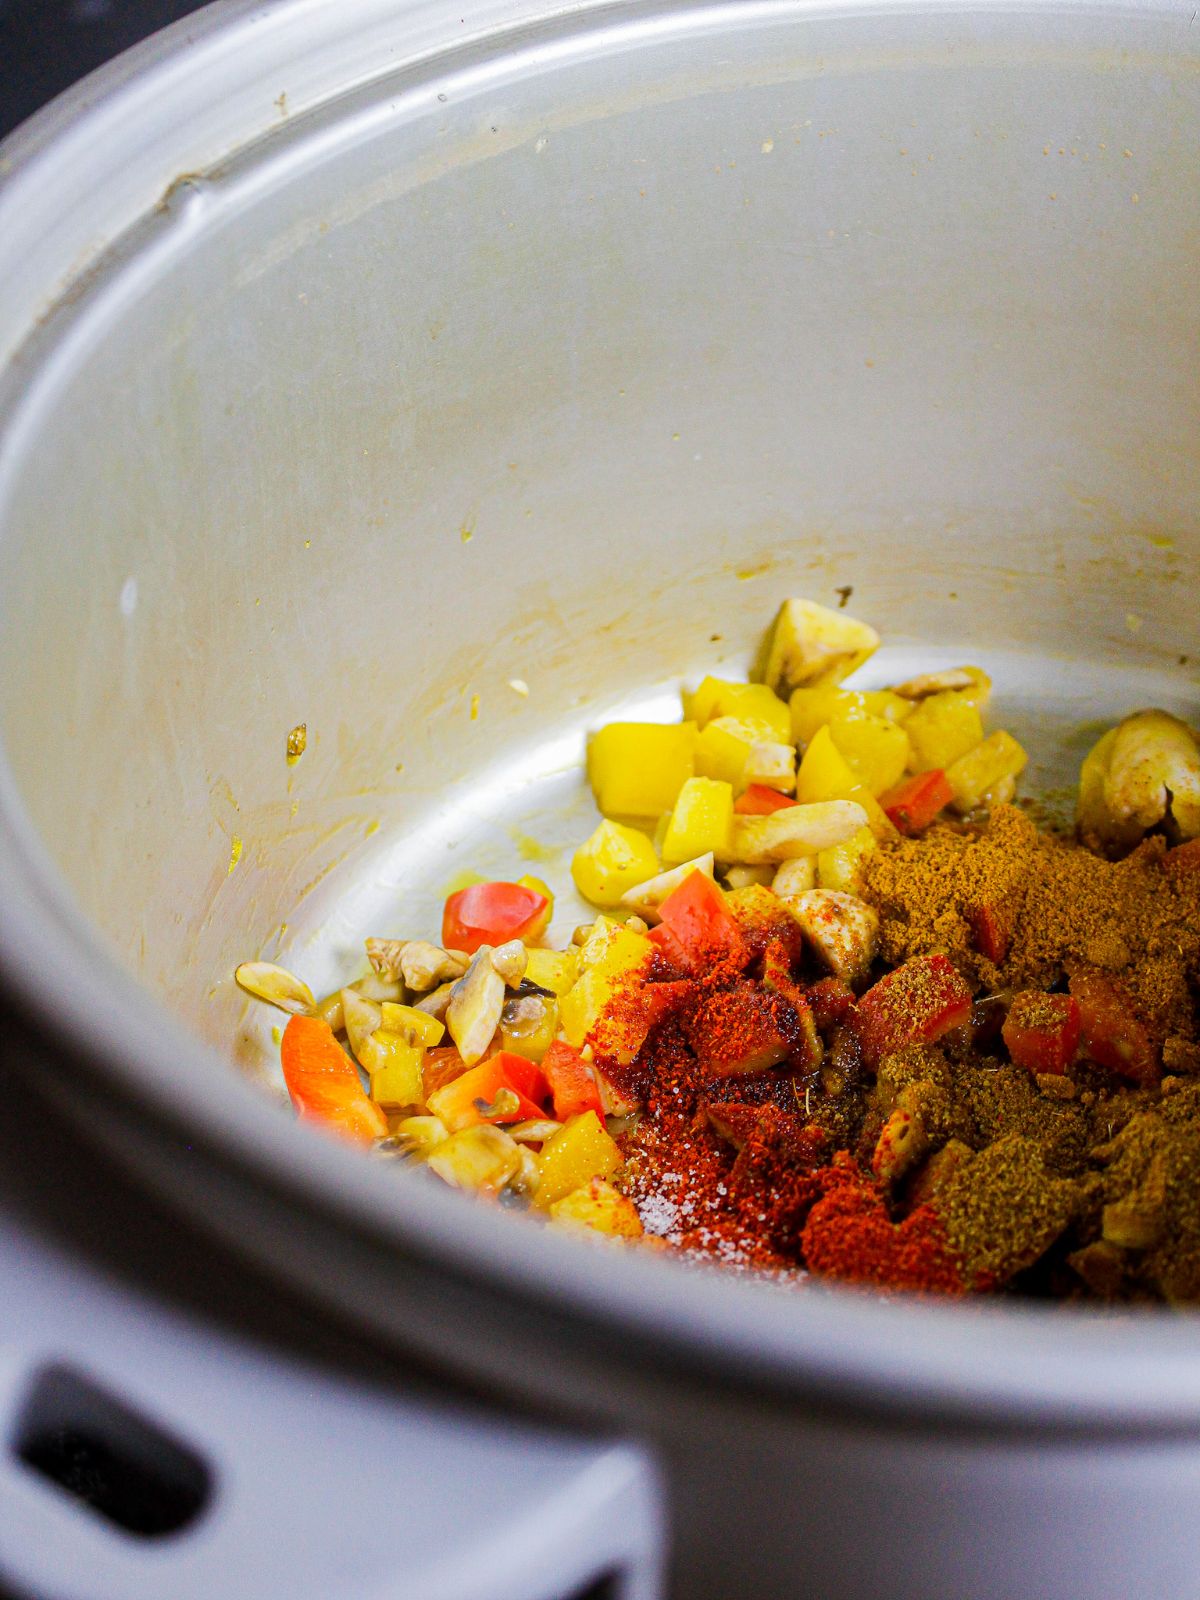 Add all the powdered spices to the pot and saute 